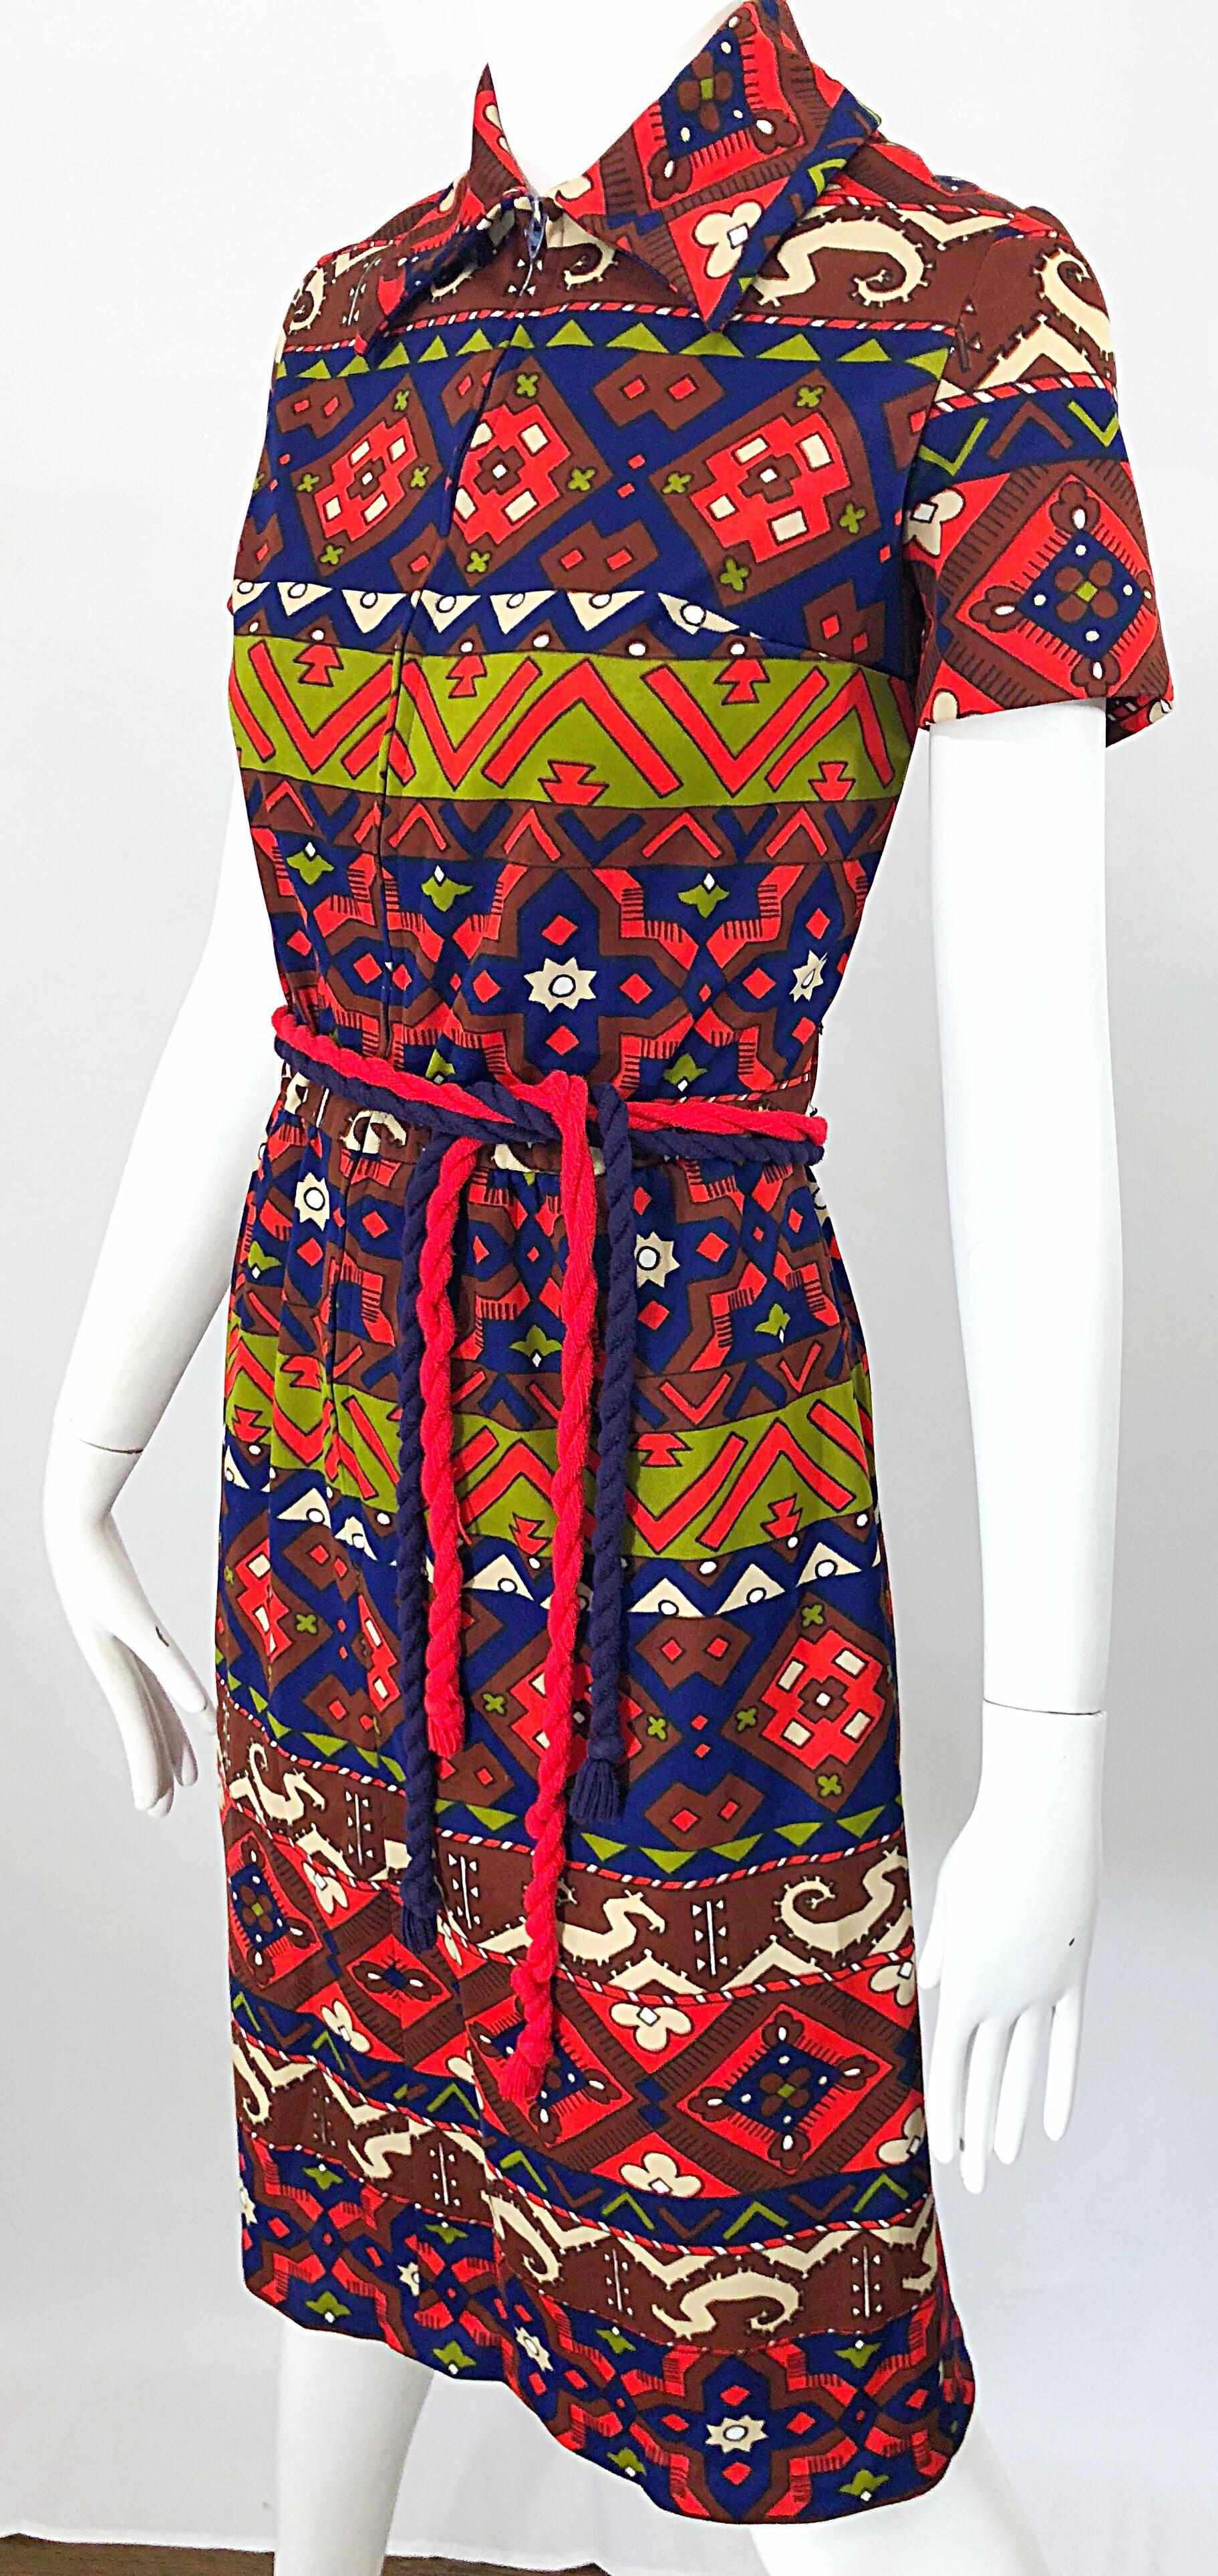 Women's 1970s Aztec Novelty Print Amazing Vintage 70s Knit Rope Belted Shirt Dress For Sale